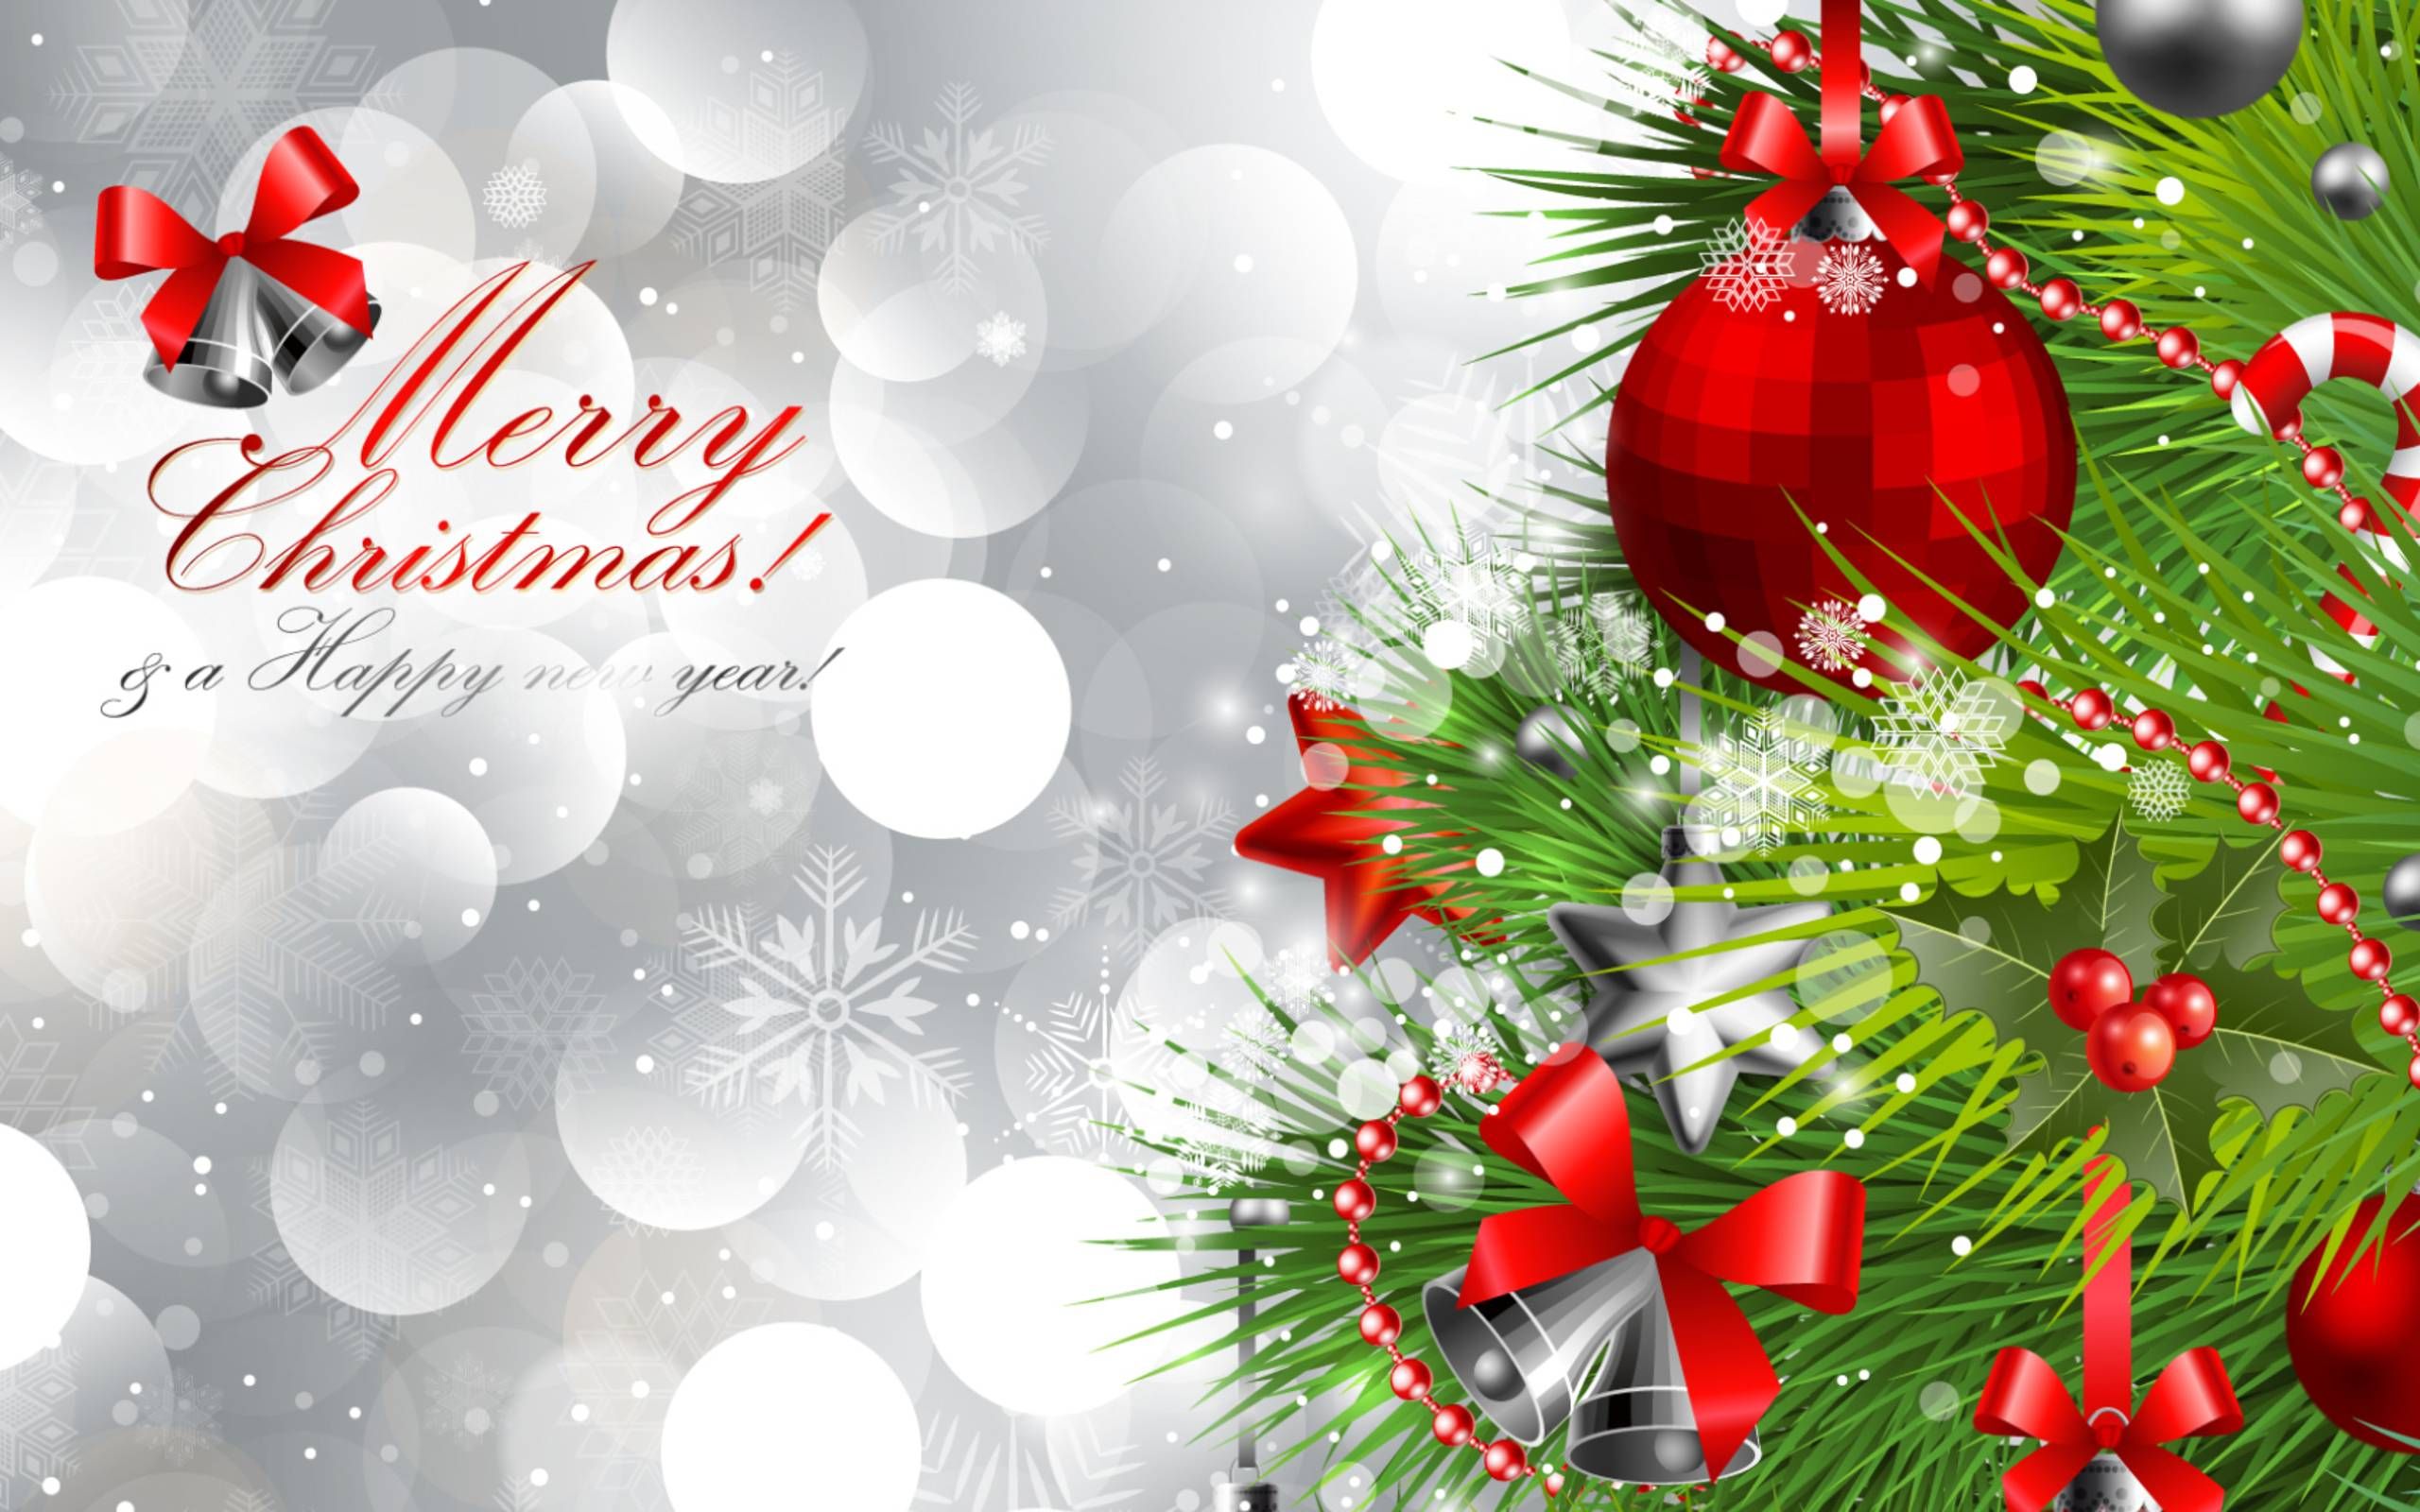 merry christmas and a happy new year wallpaper